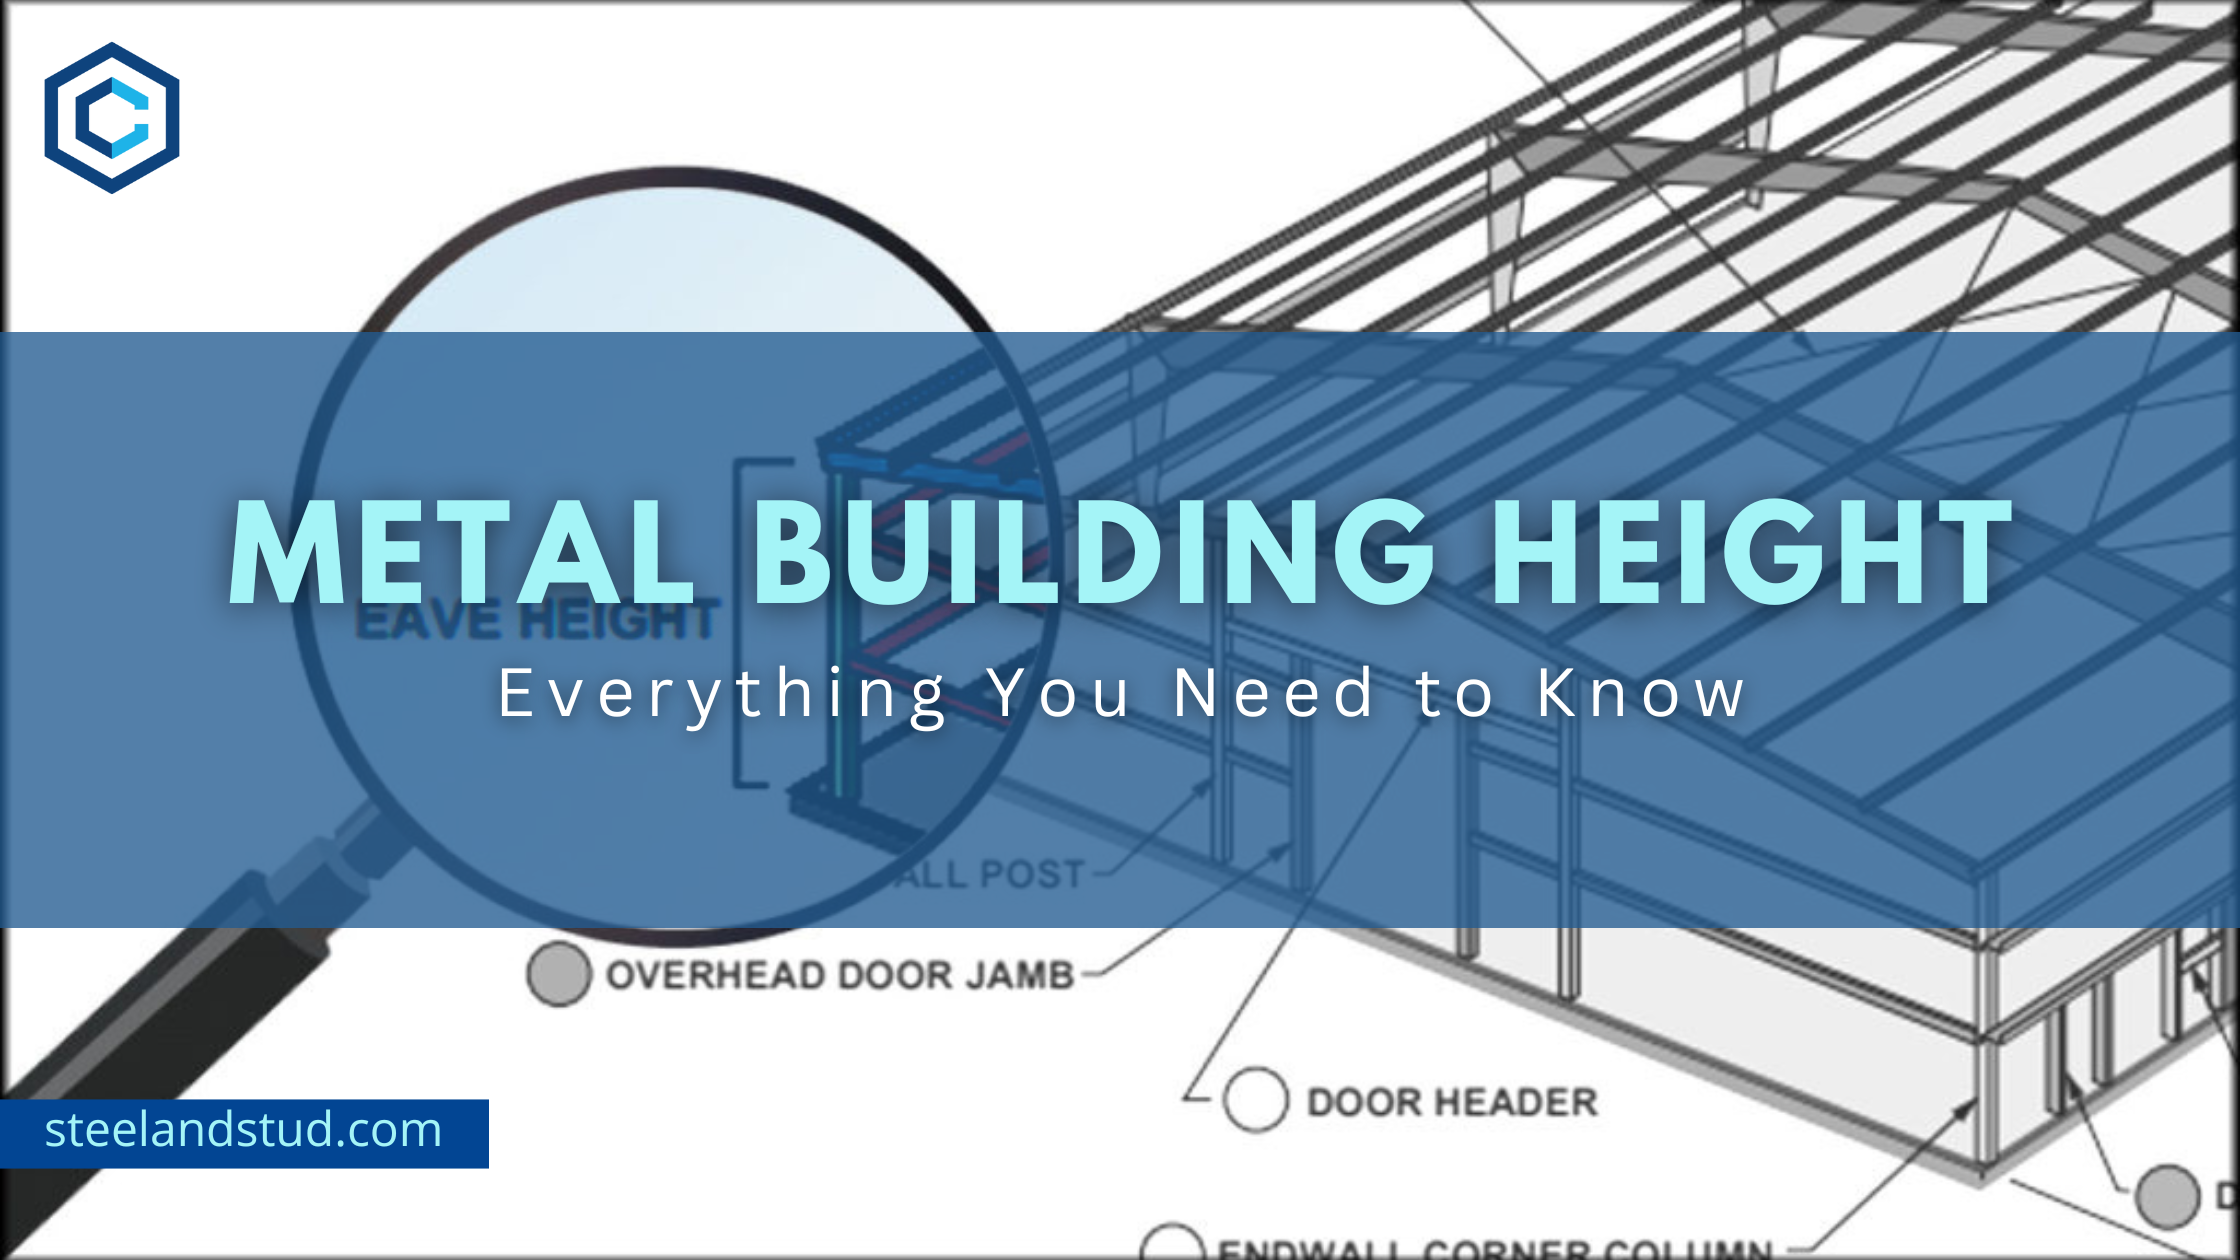 Metal Building Height: Everything You Need to Know